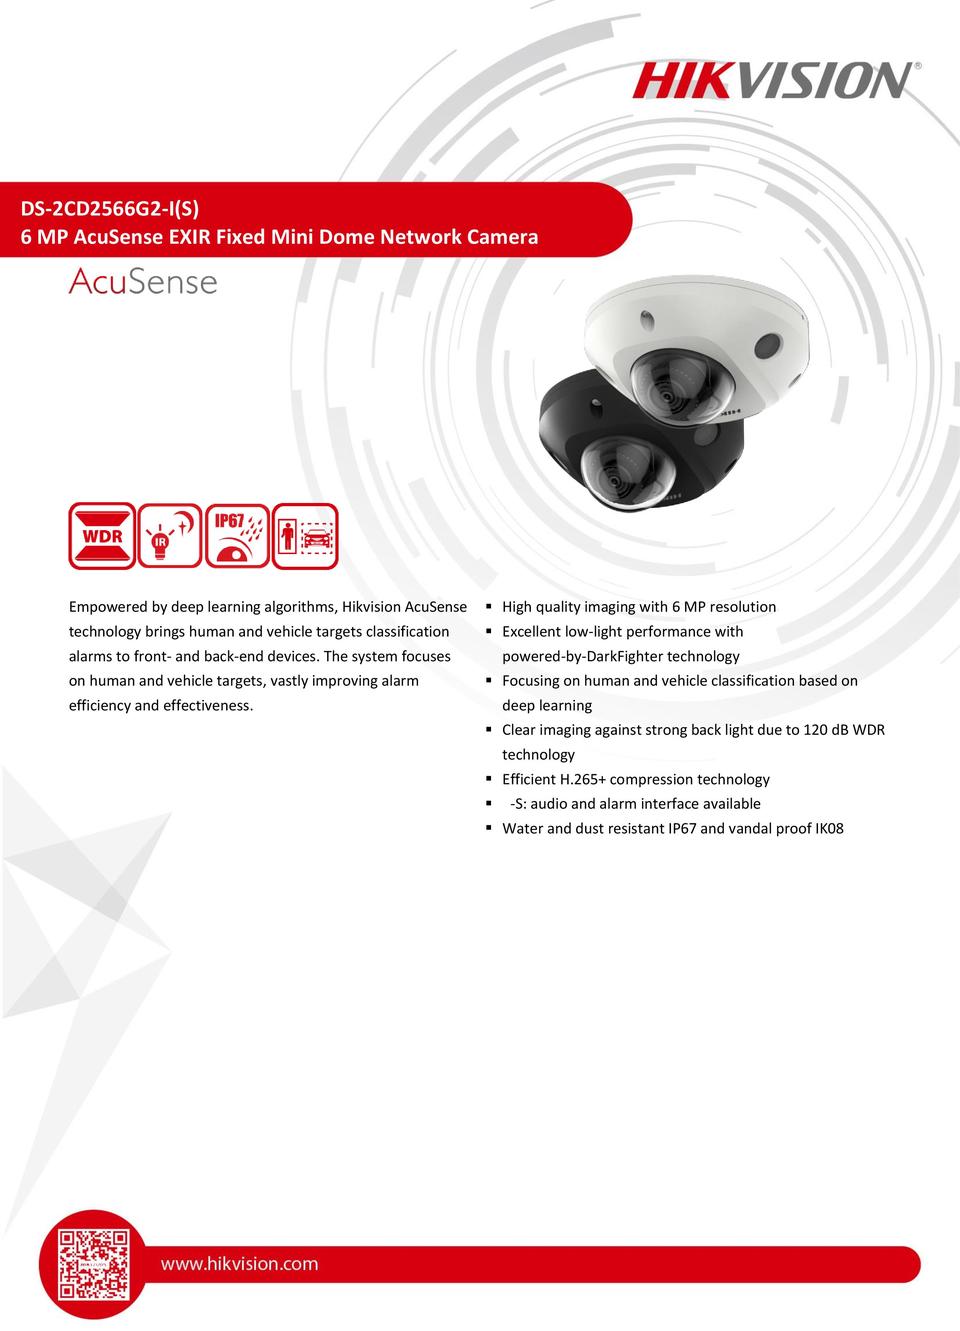 Hikvision DS-2CD2566G2-I 6MP IP Acusense Outdoor Mini Dome with 2.8 Fixed Lens 0